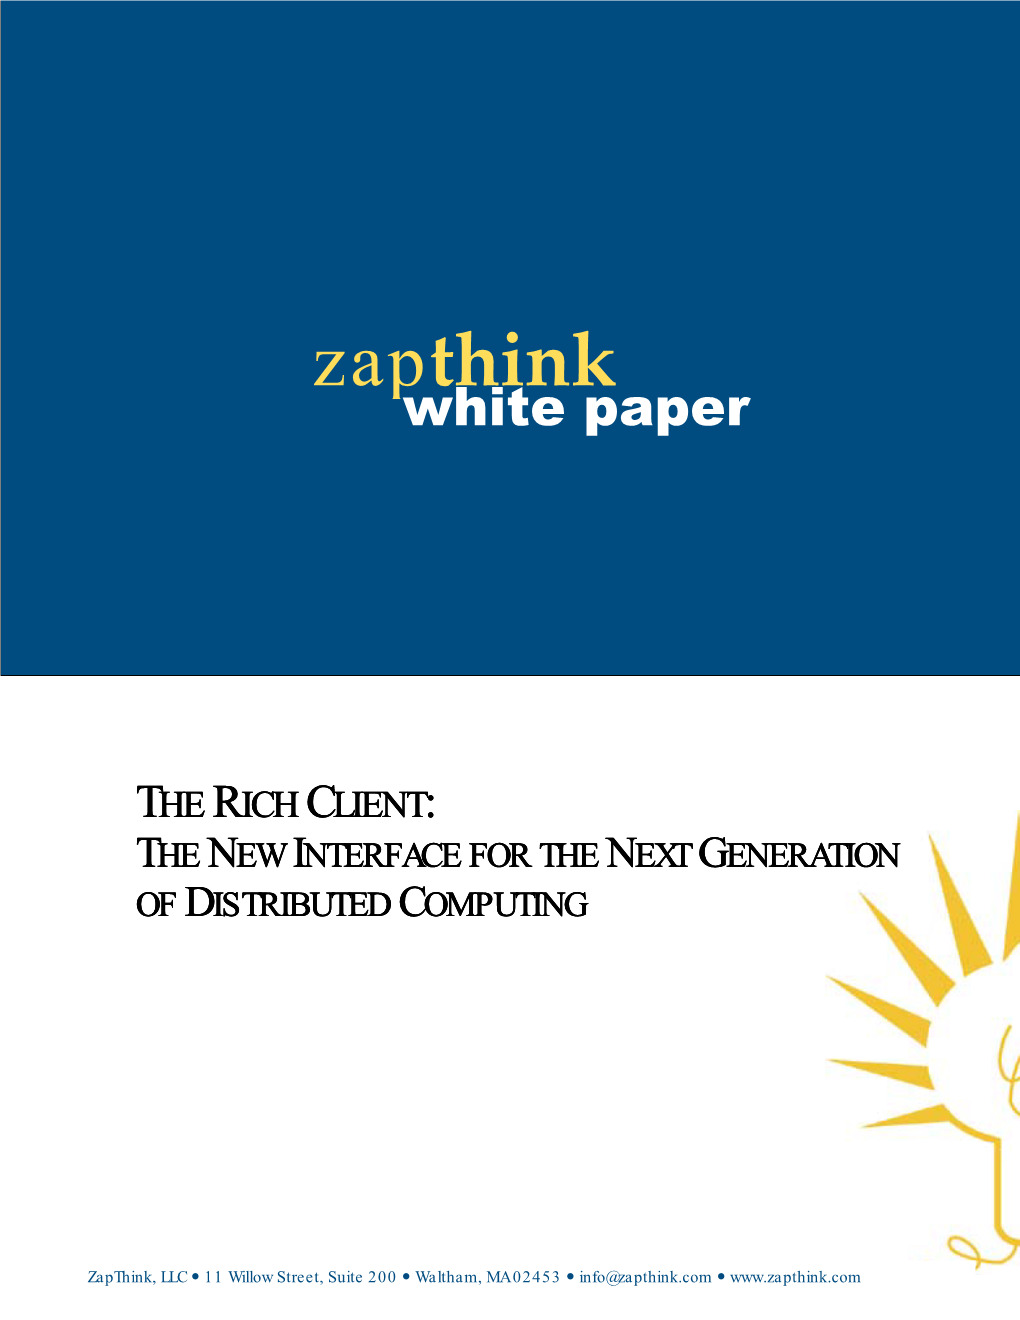 Download the Full the Rich Client: the New Interface for the Next Generation of Distributed Computing